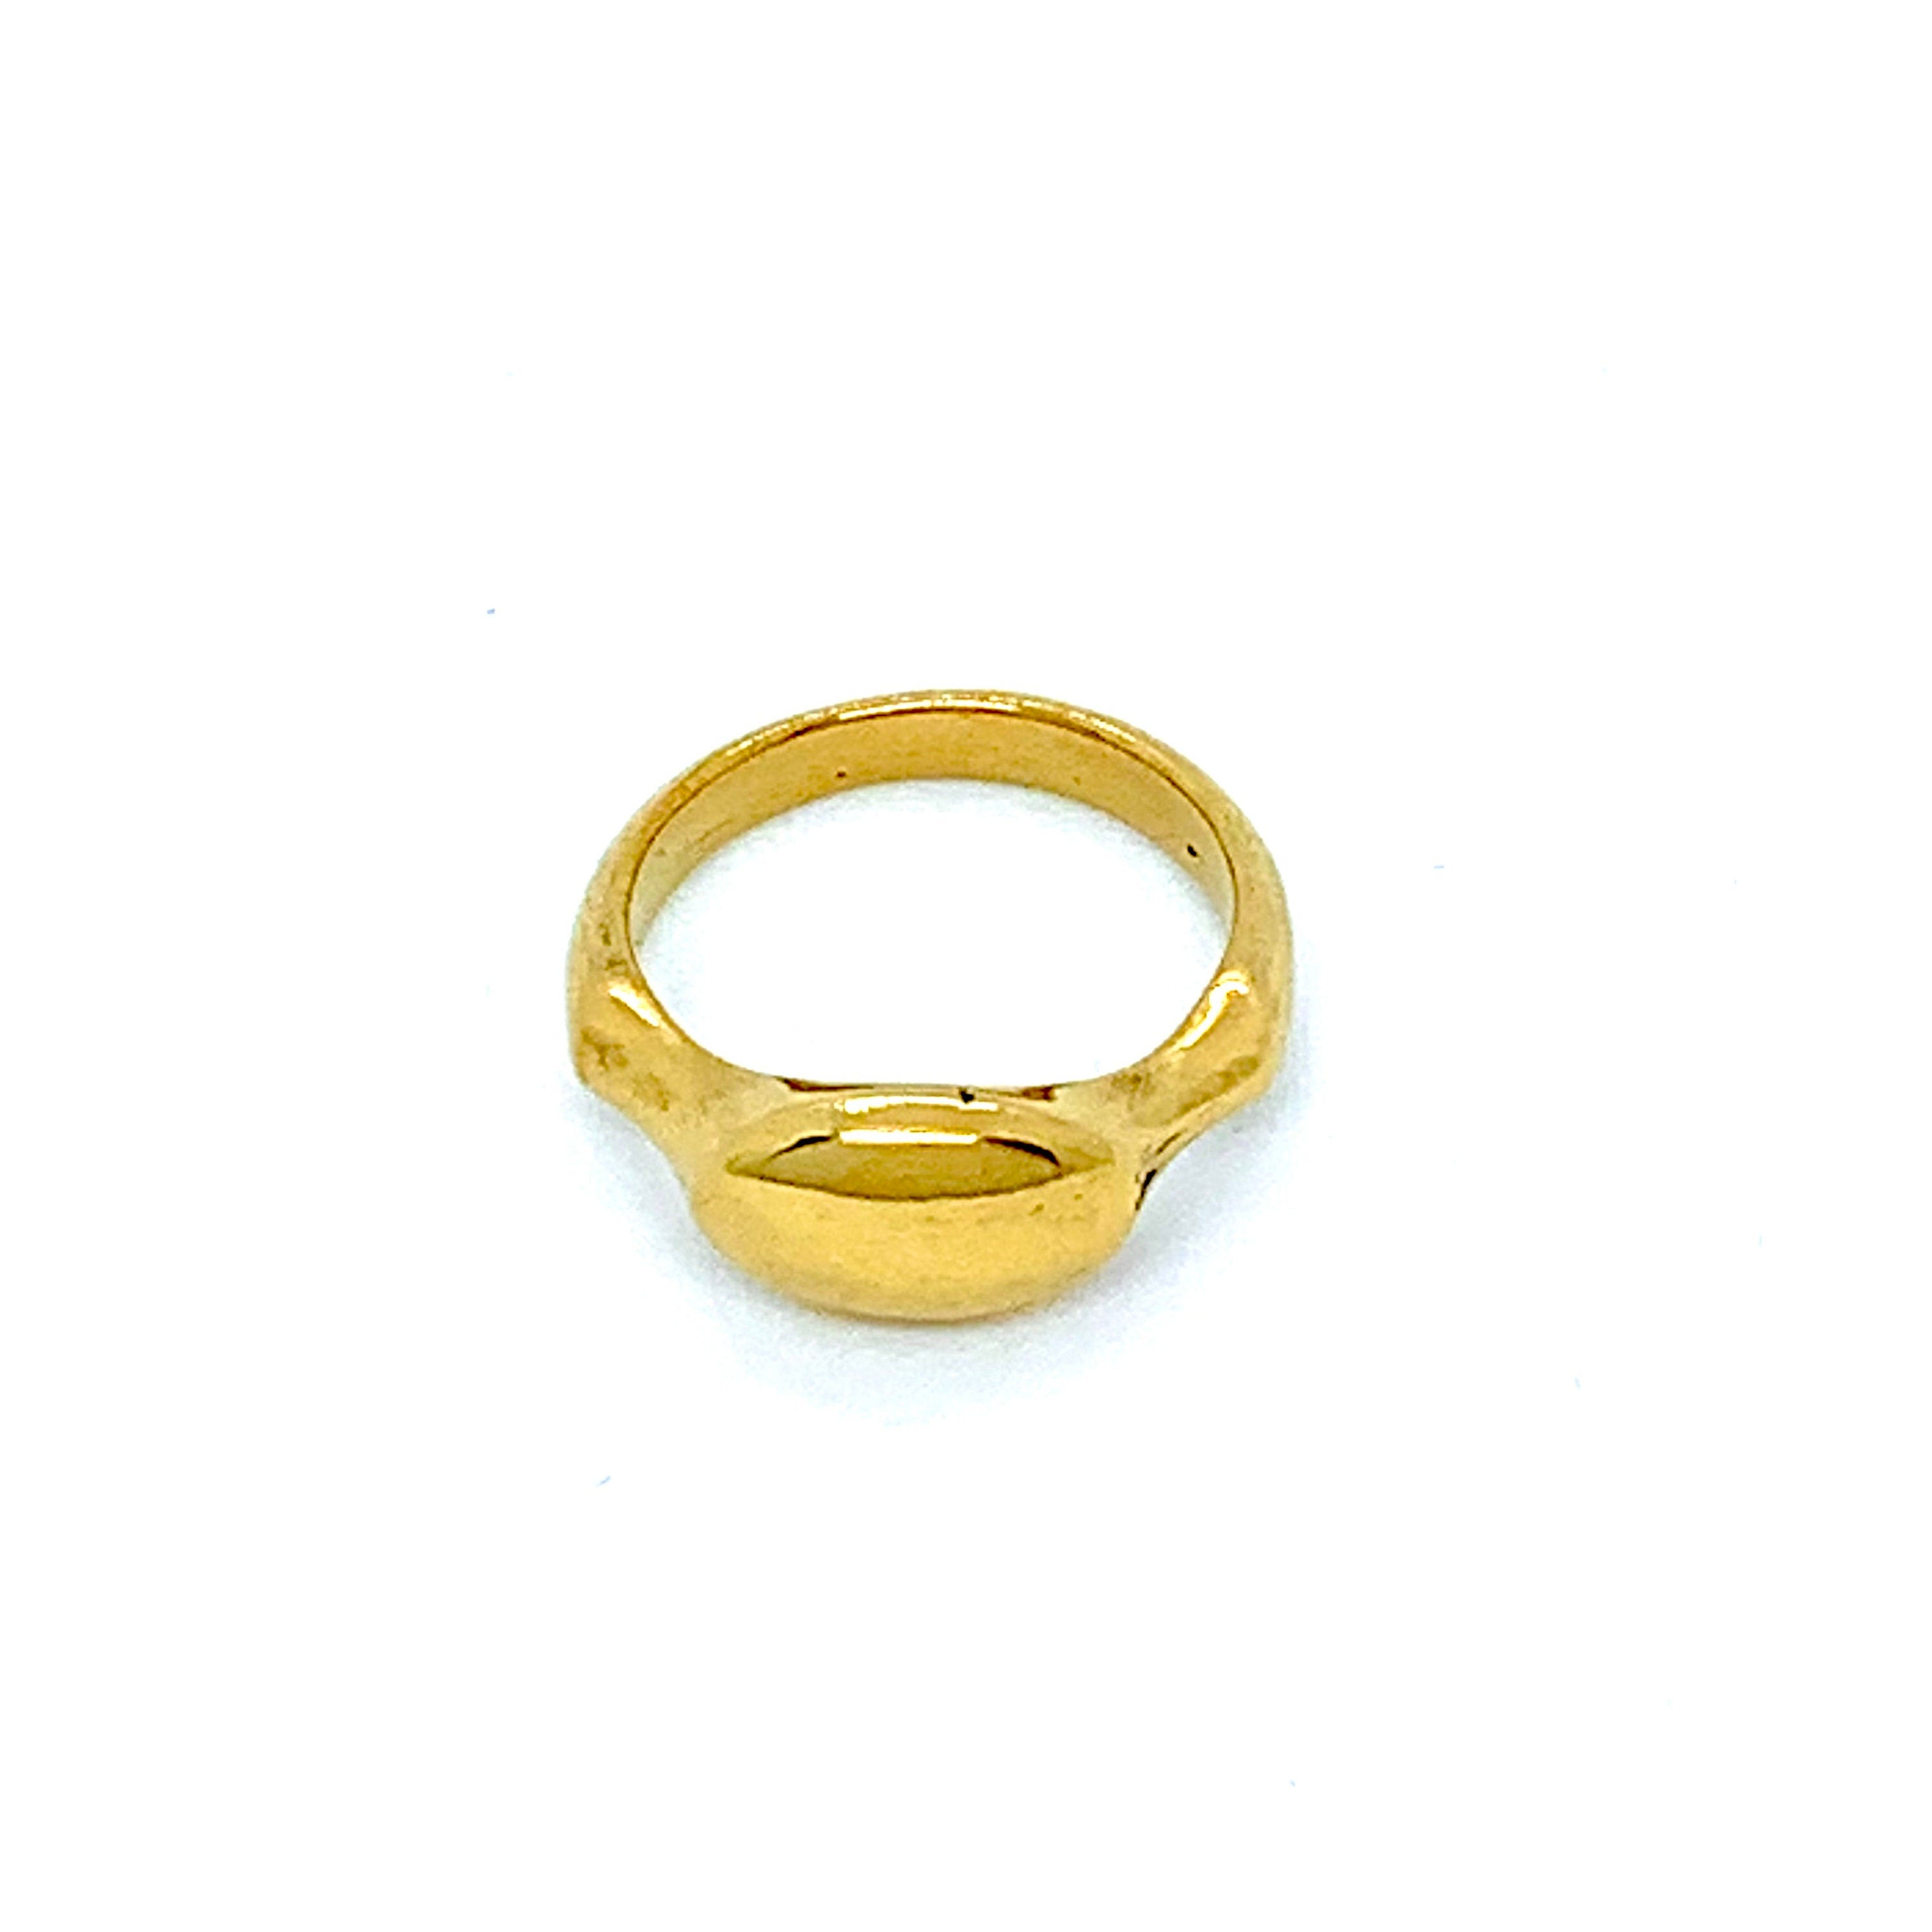 Gold Ring - Double Banded Adjustable **Matte Finish** - 10 Grams, 24K Pure  - Large